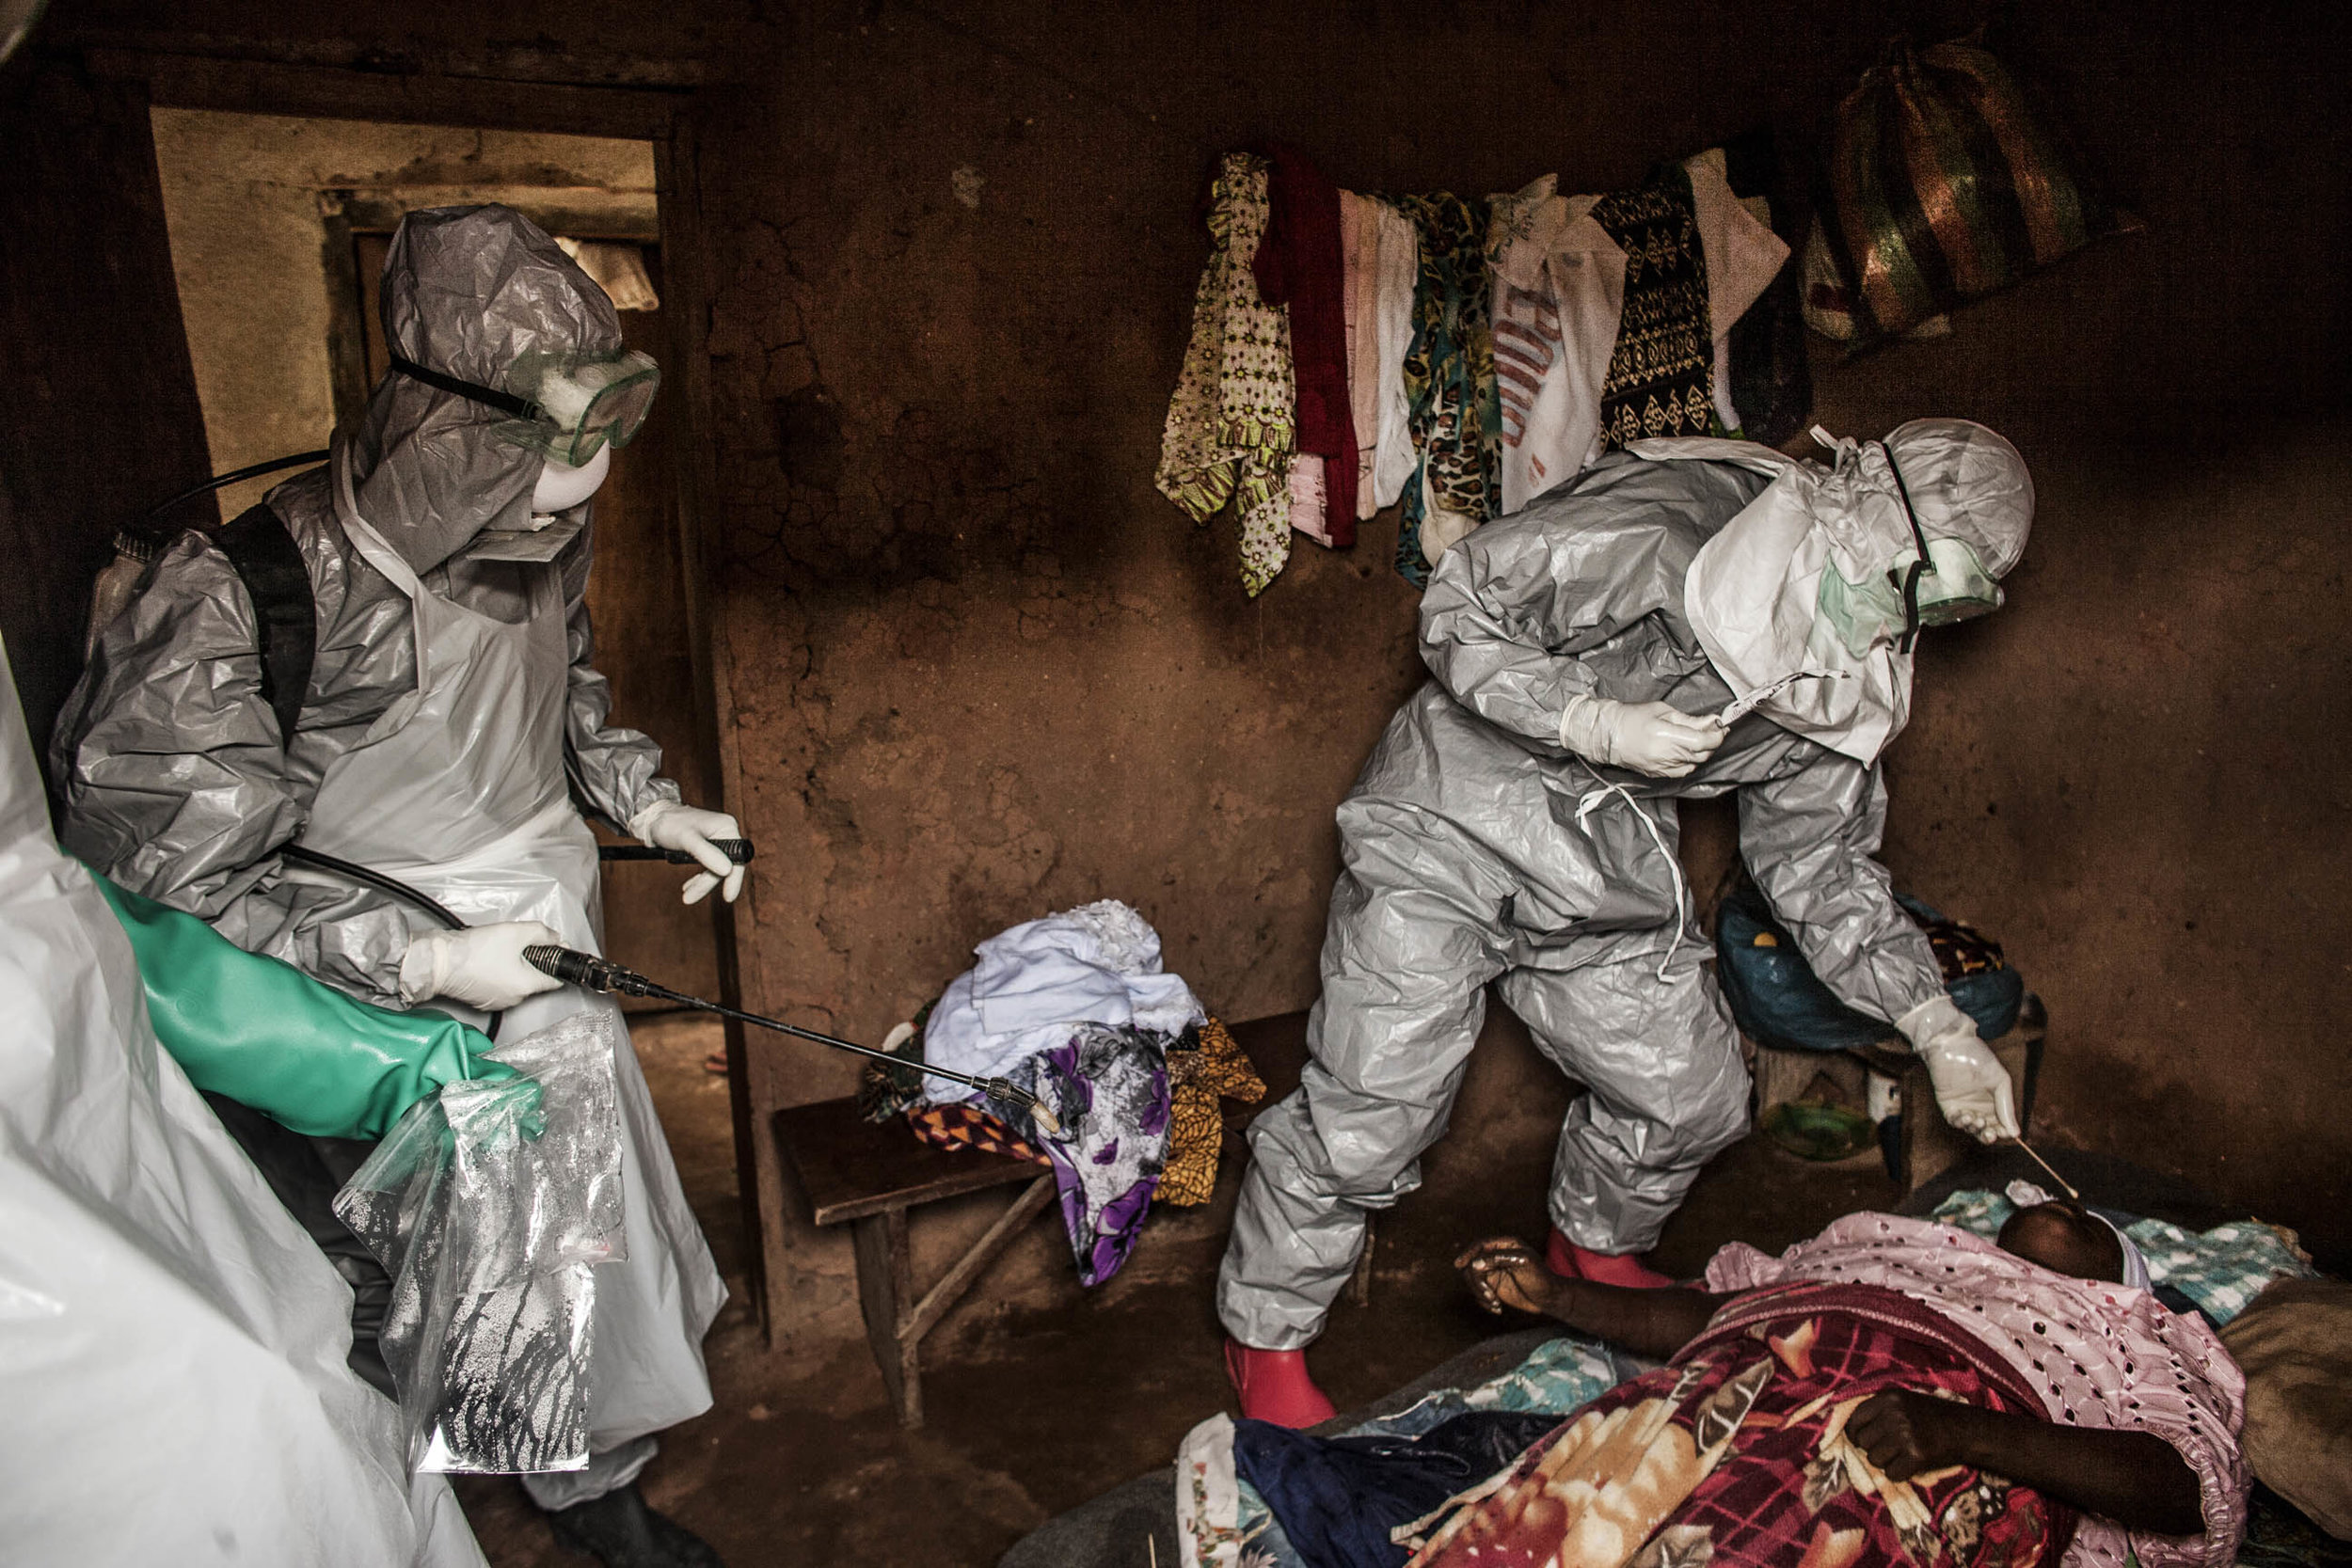  Members of a Red Cross burial team take samples from a   woman suspected of dying of Ebola in the village of Dia, near the border with Guinea, on Monday, August 18, 2014. So-called "safe burials," conducted by the International Federation of the Red